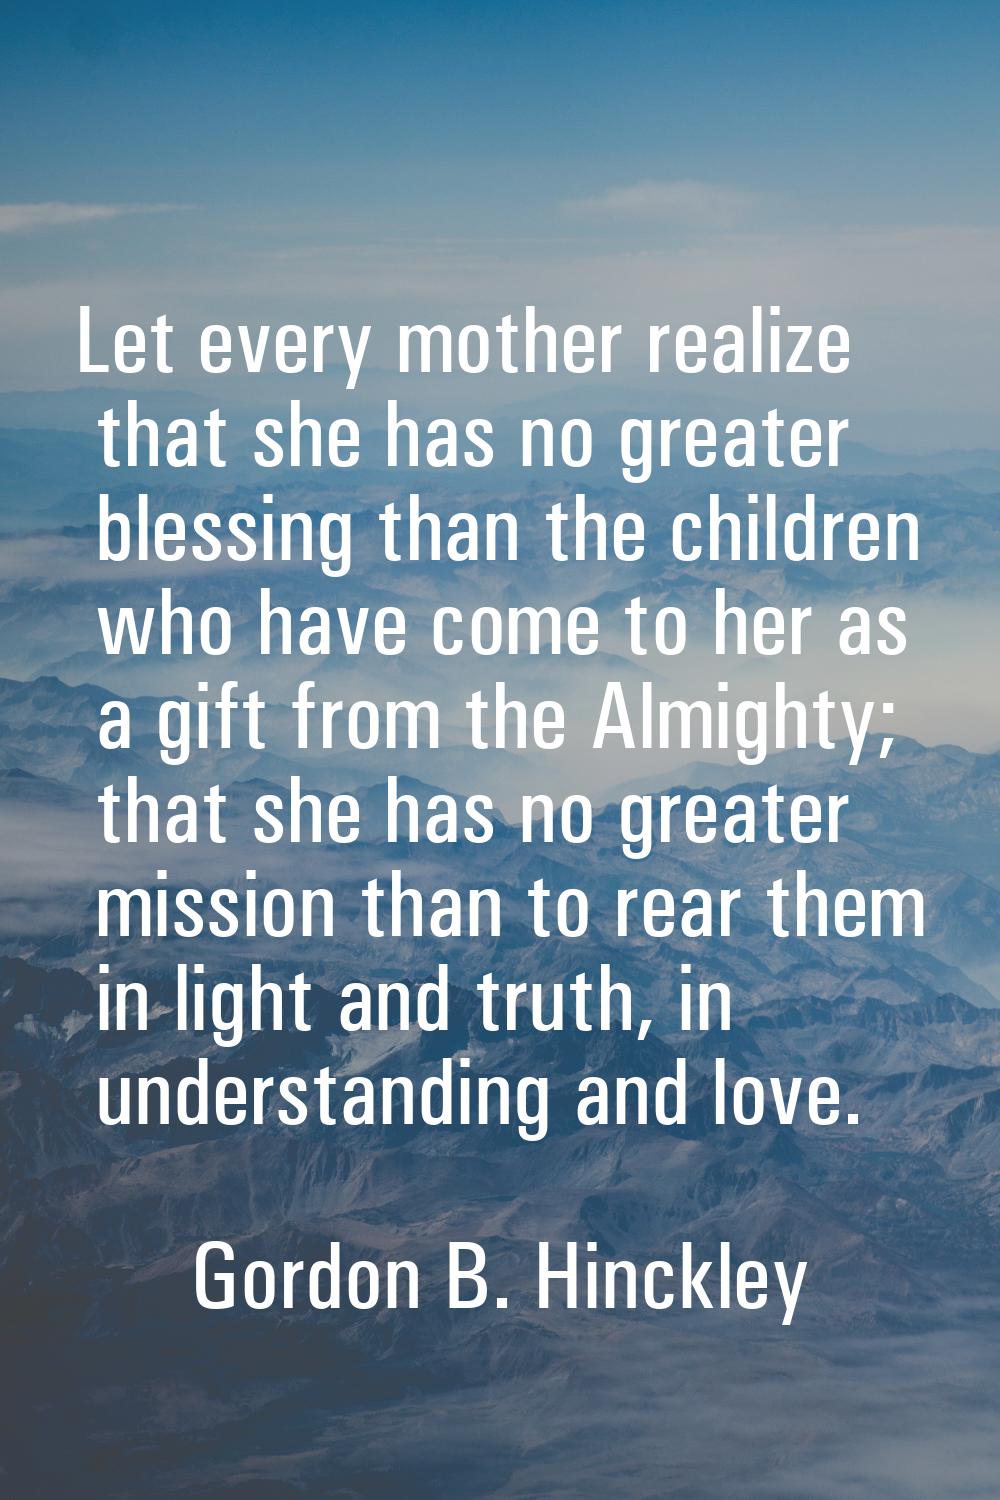 Let every mother realize that she has no greater blessing than the children who have come to her as